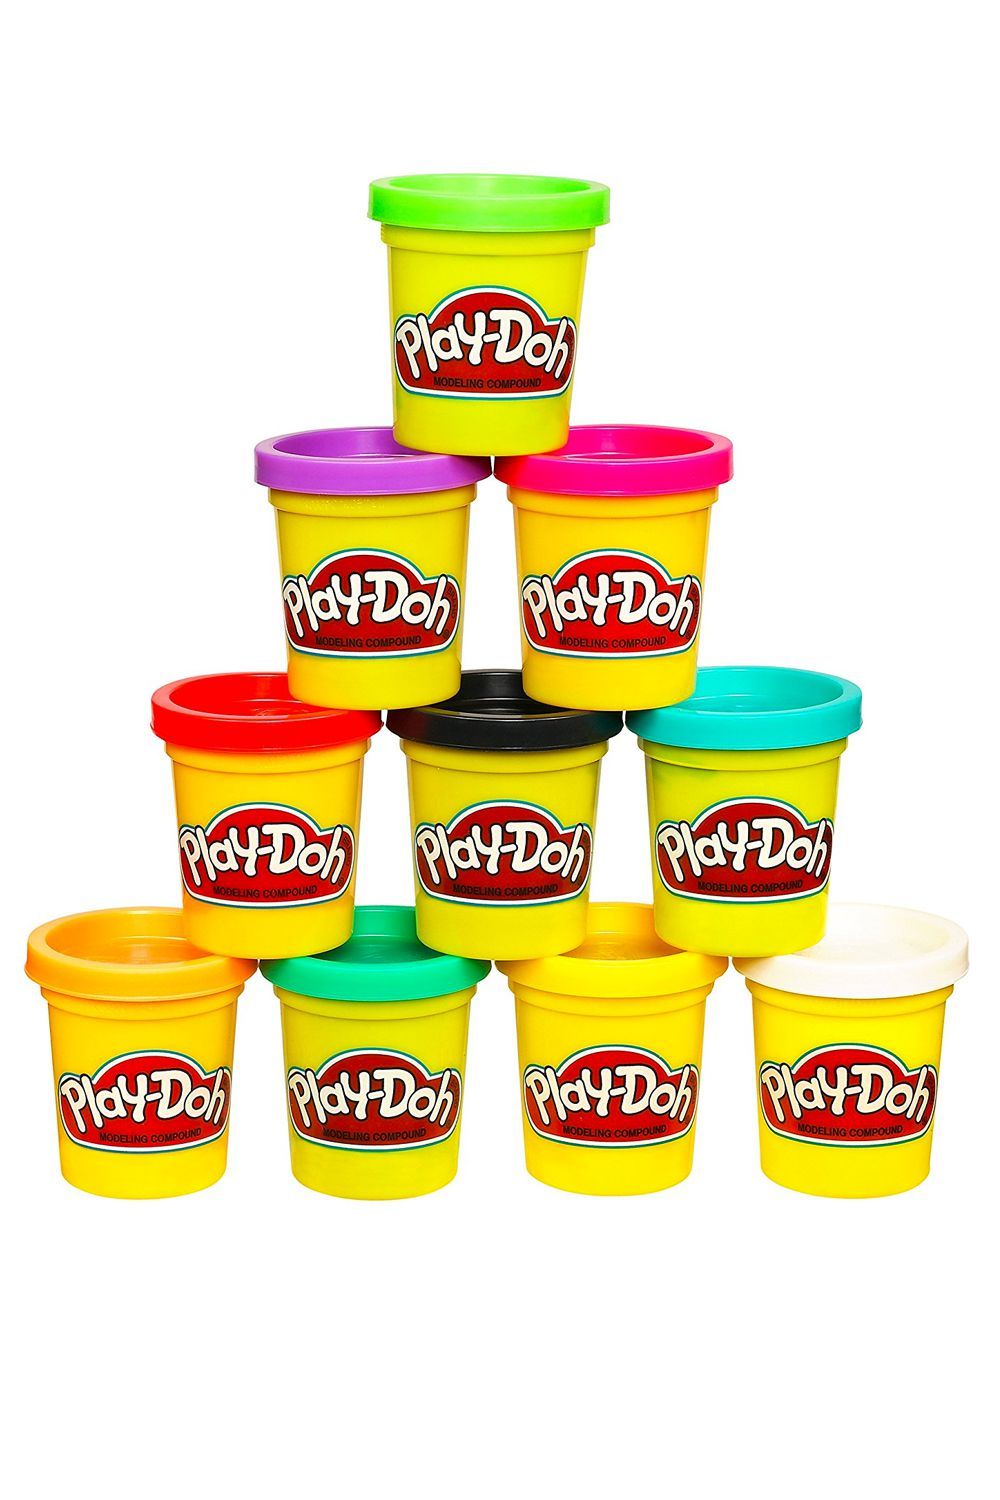 15 Fun Facts You Never Knew About Play-Doh - Everything You Need to Know  About Play-Doh